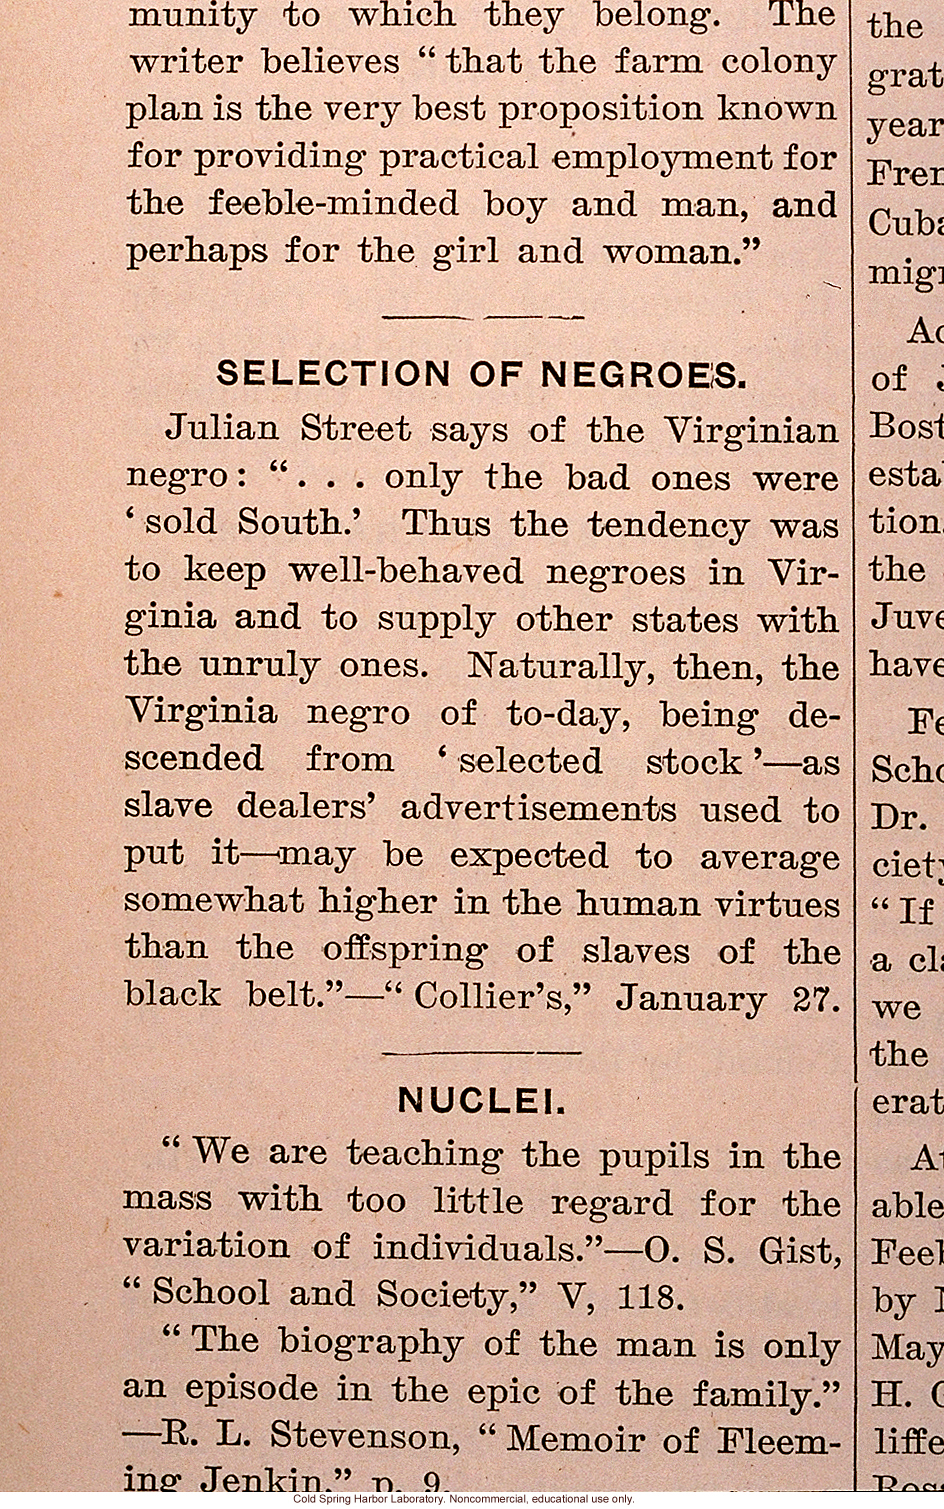 &quote;Selection of Negroes,&quote; Eugenical News (vol. 2), eugenic effect of slave trading in the South